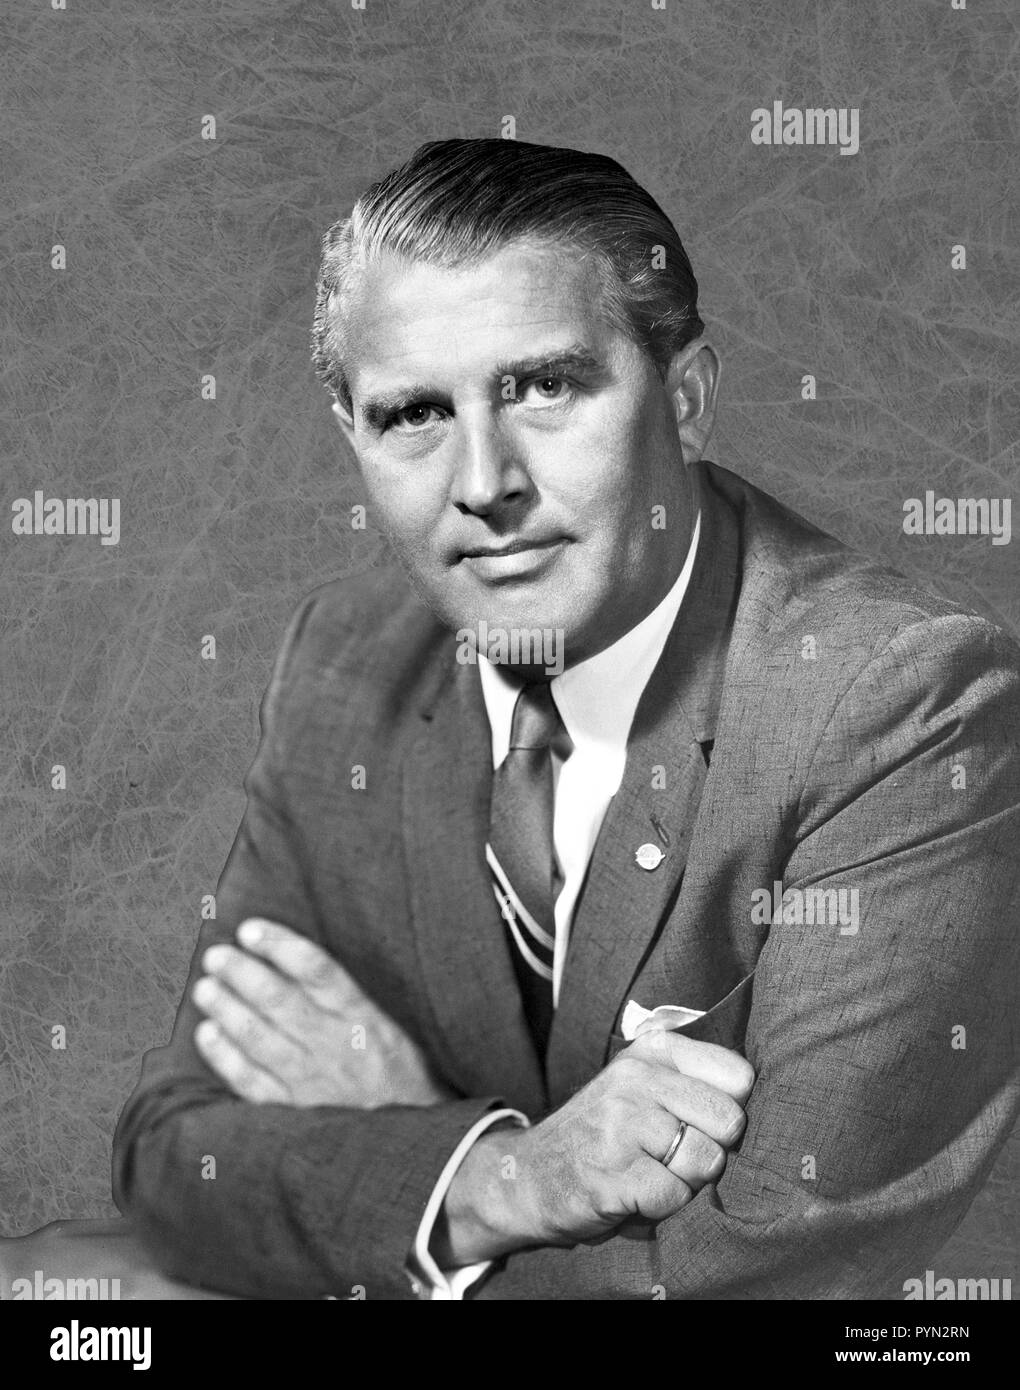 Dr. Wernher von Braun served as Marshall Space Flight Center's first director from July 1, 1960 until January 27, 1970, when he was appointed NASA Deputy Associate Administrator for Plarning. Stock Photo